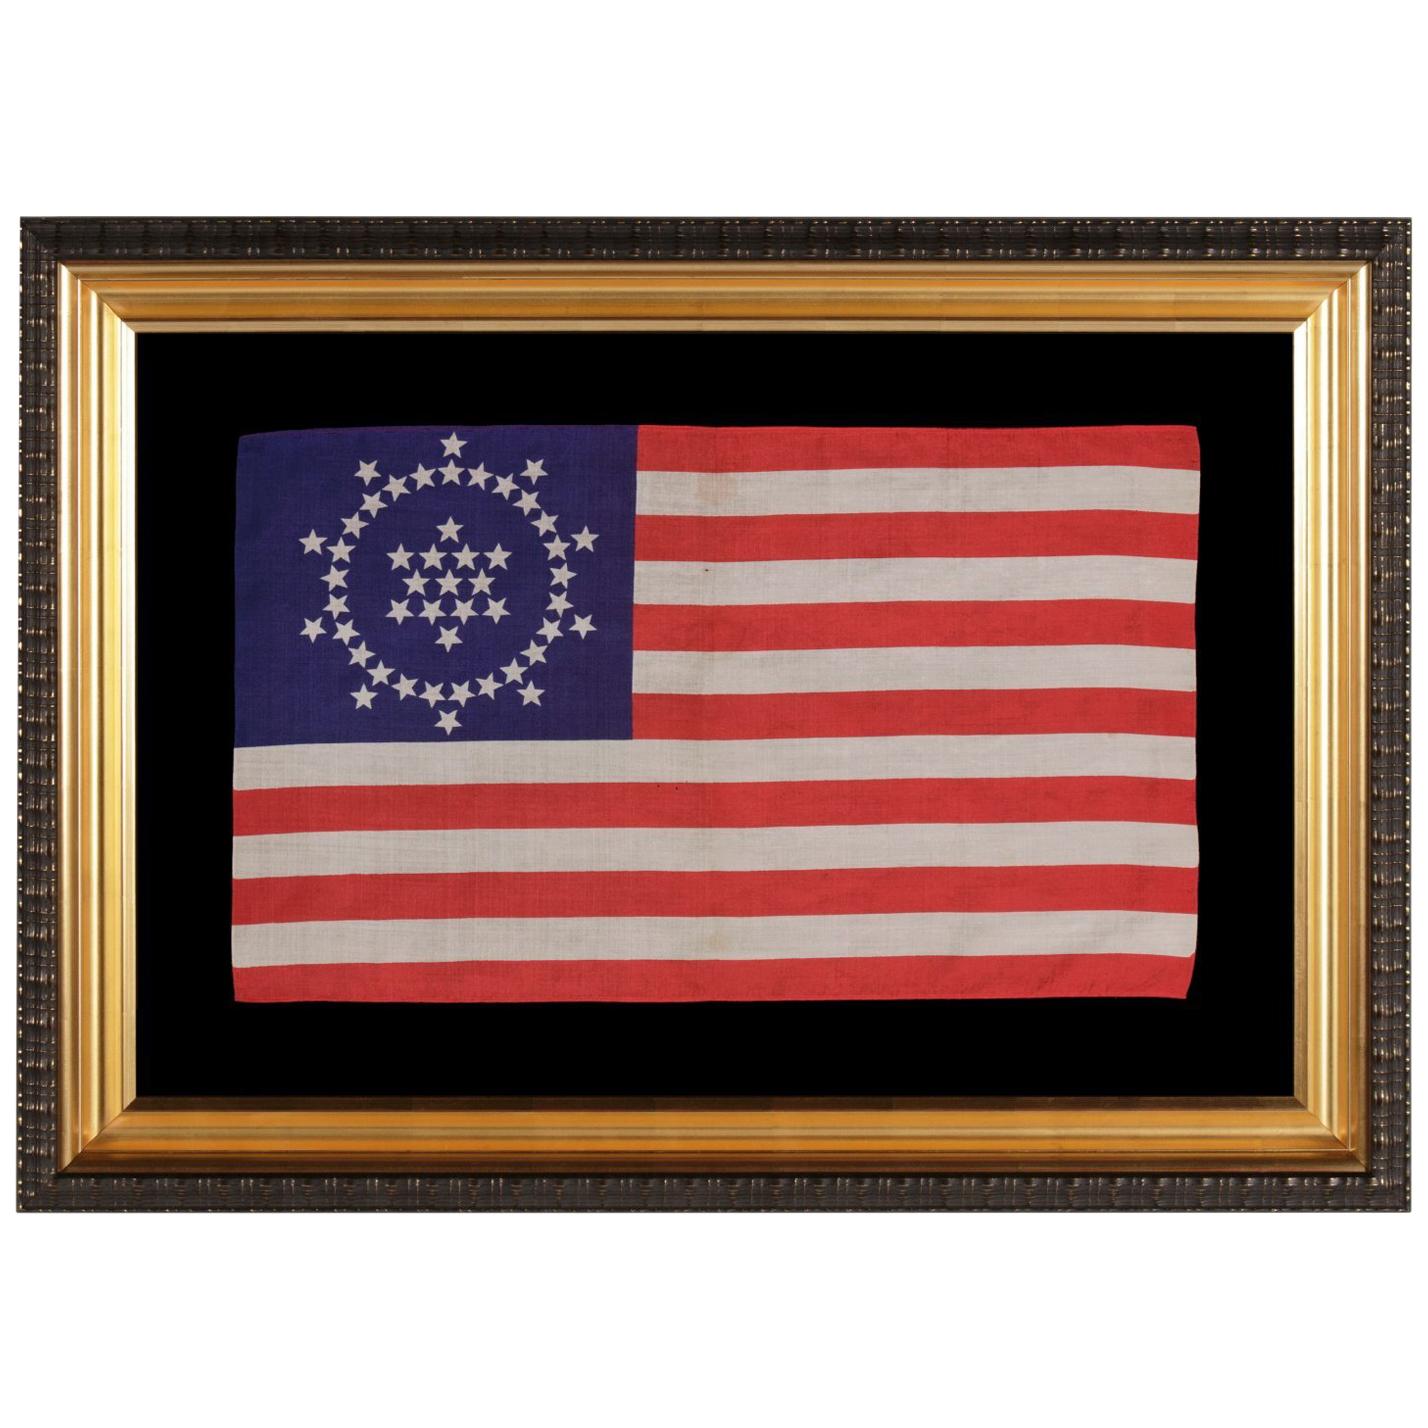 48 Stars on an Antique American Flag Designed and Commissioned by Wayne Whipple